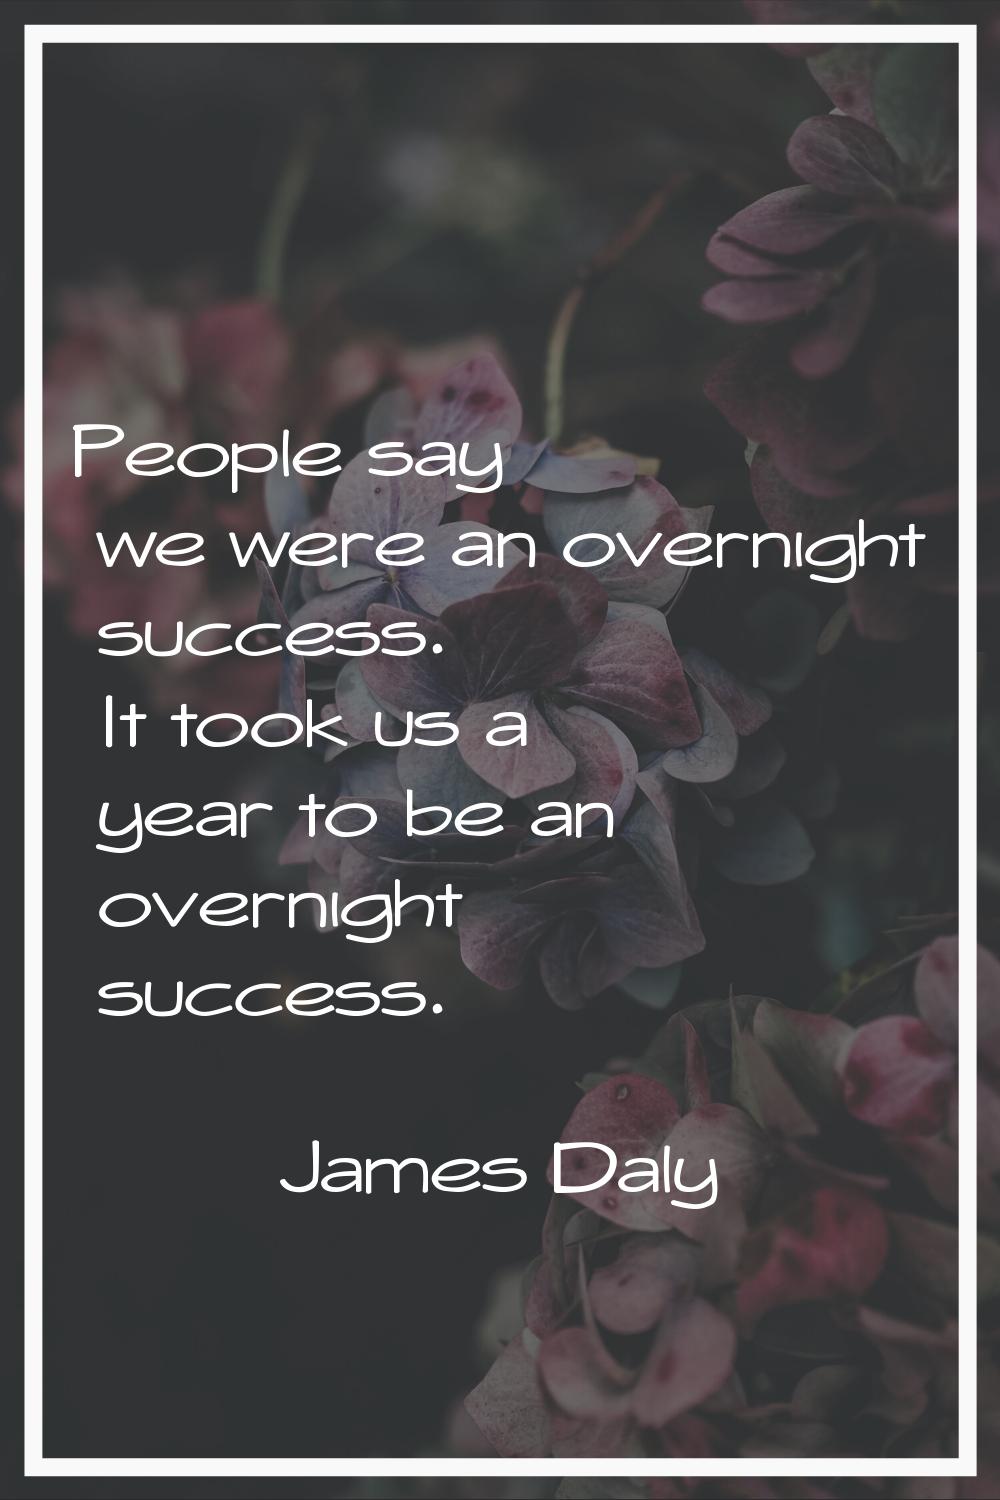 People say we were an overnight success. It took us a year to be an overnight success.